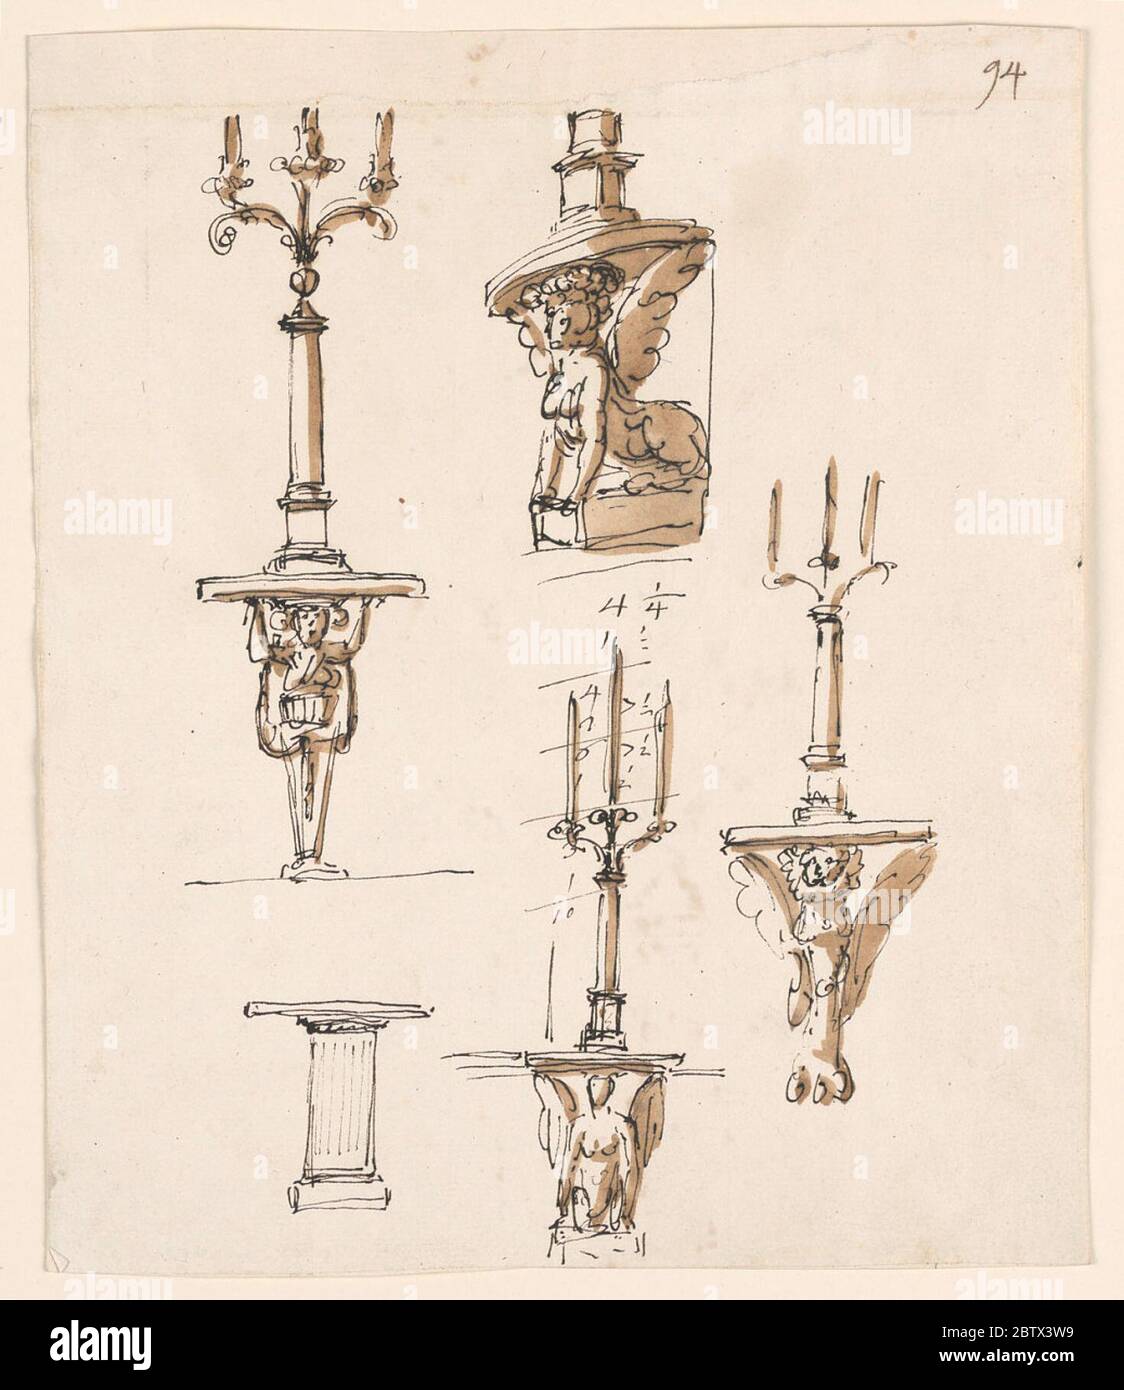 Designs for Five Console Tables Three with Candlesticks Probably for Rooms in the Palazzo Altieri Rome. Research in ProgressAbove the top of the table is supported by the head and the hands of a gaine, above is is a candlestick consisting of a monumental column, with a sphere on top, from which three branches rise. Stock Photo